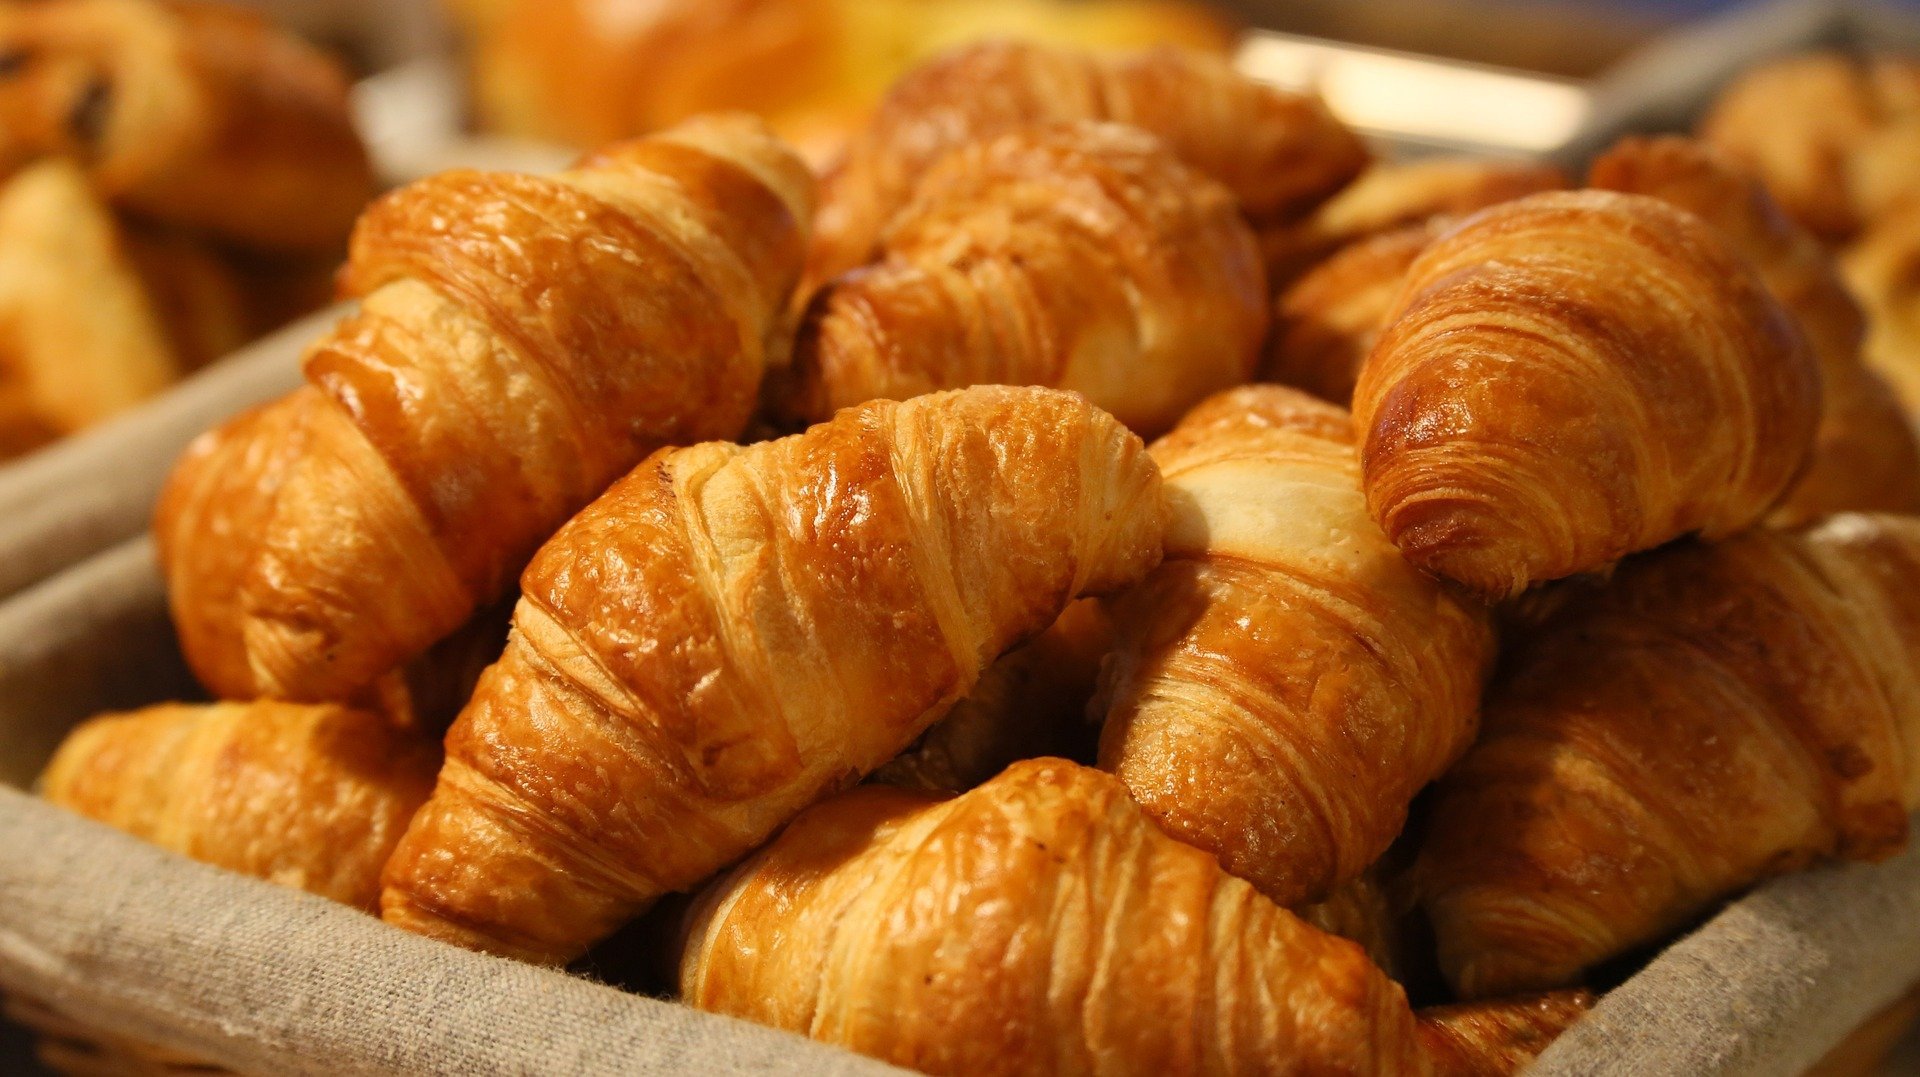 Pictured - Puff pastry, croissants for breakfast | Source: Pixabay